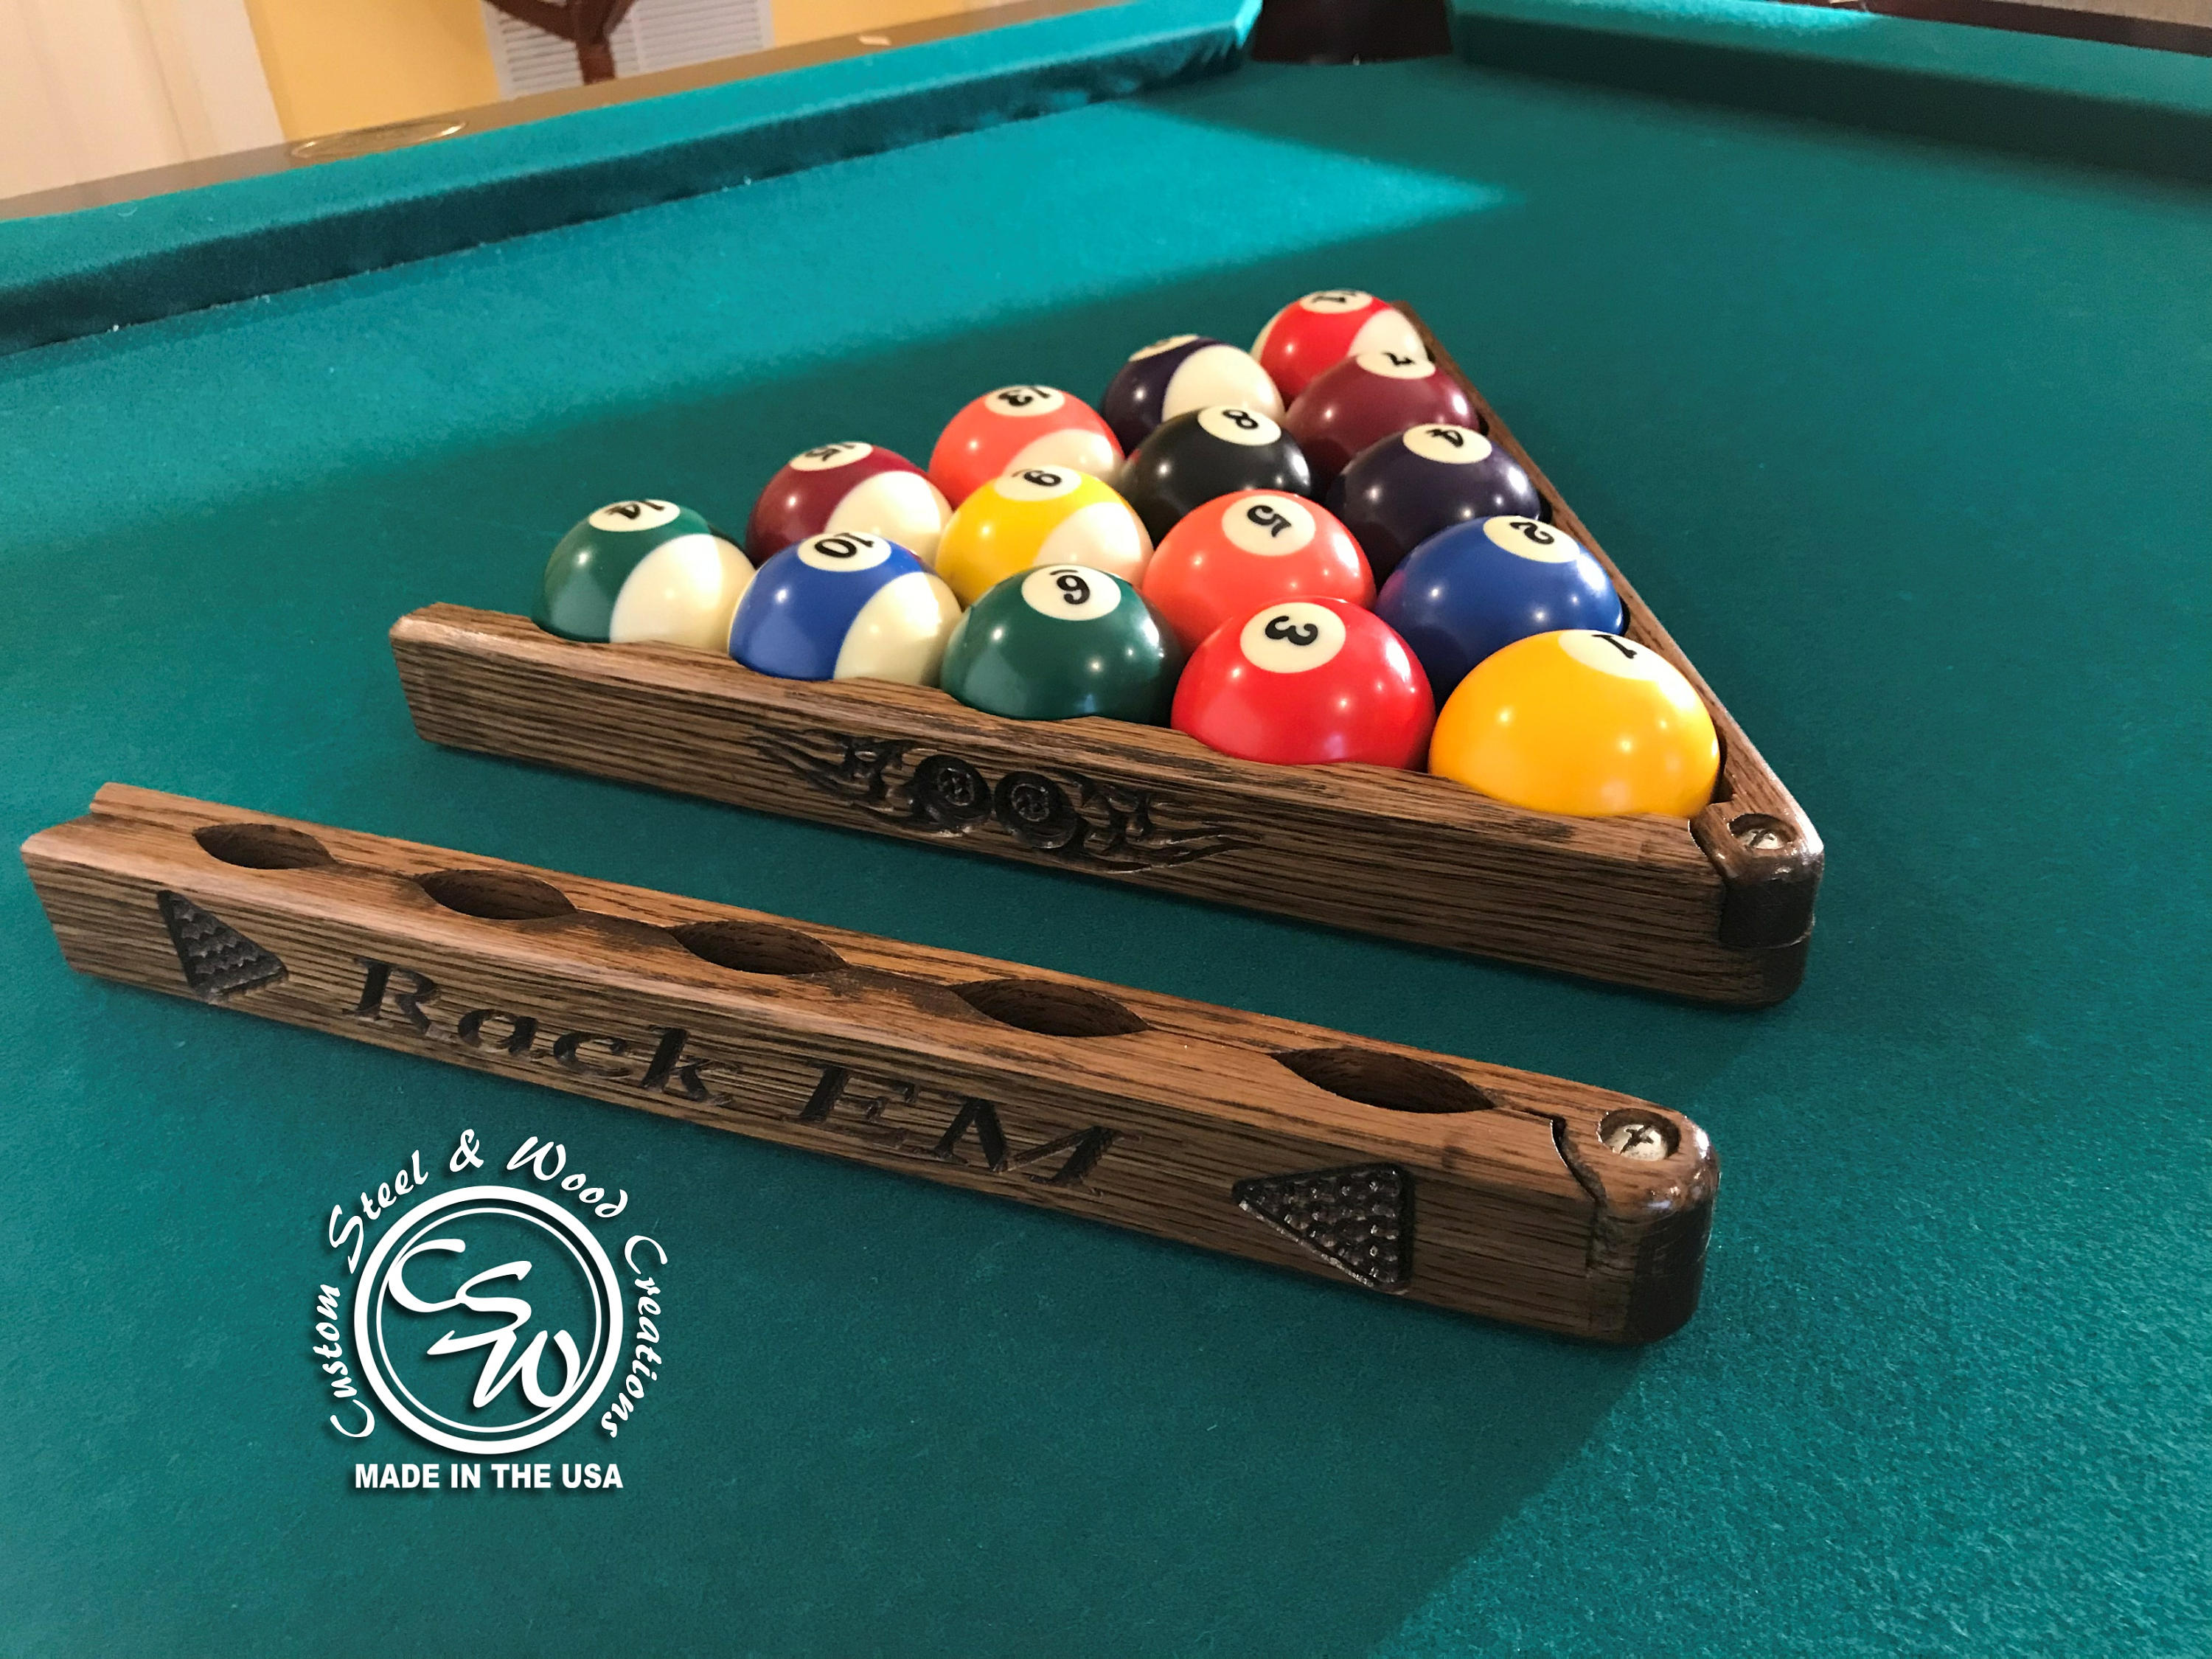 The Best Way to Rack An 8-Ball Rack (in my opinion). : r/billiards